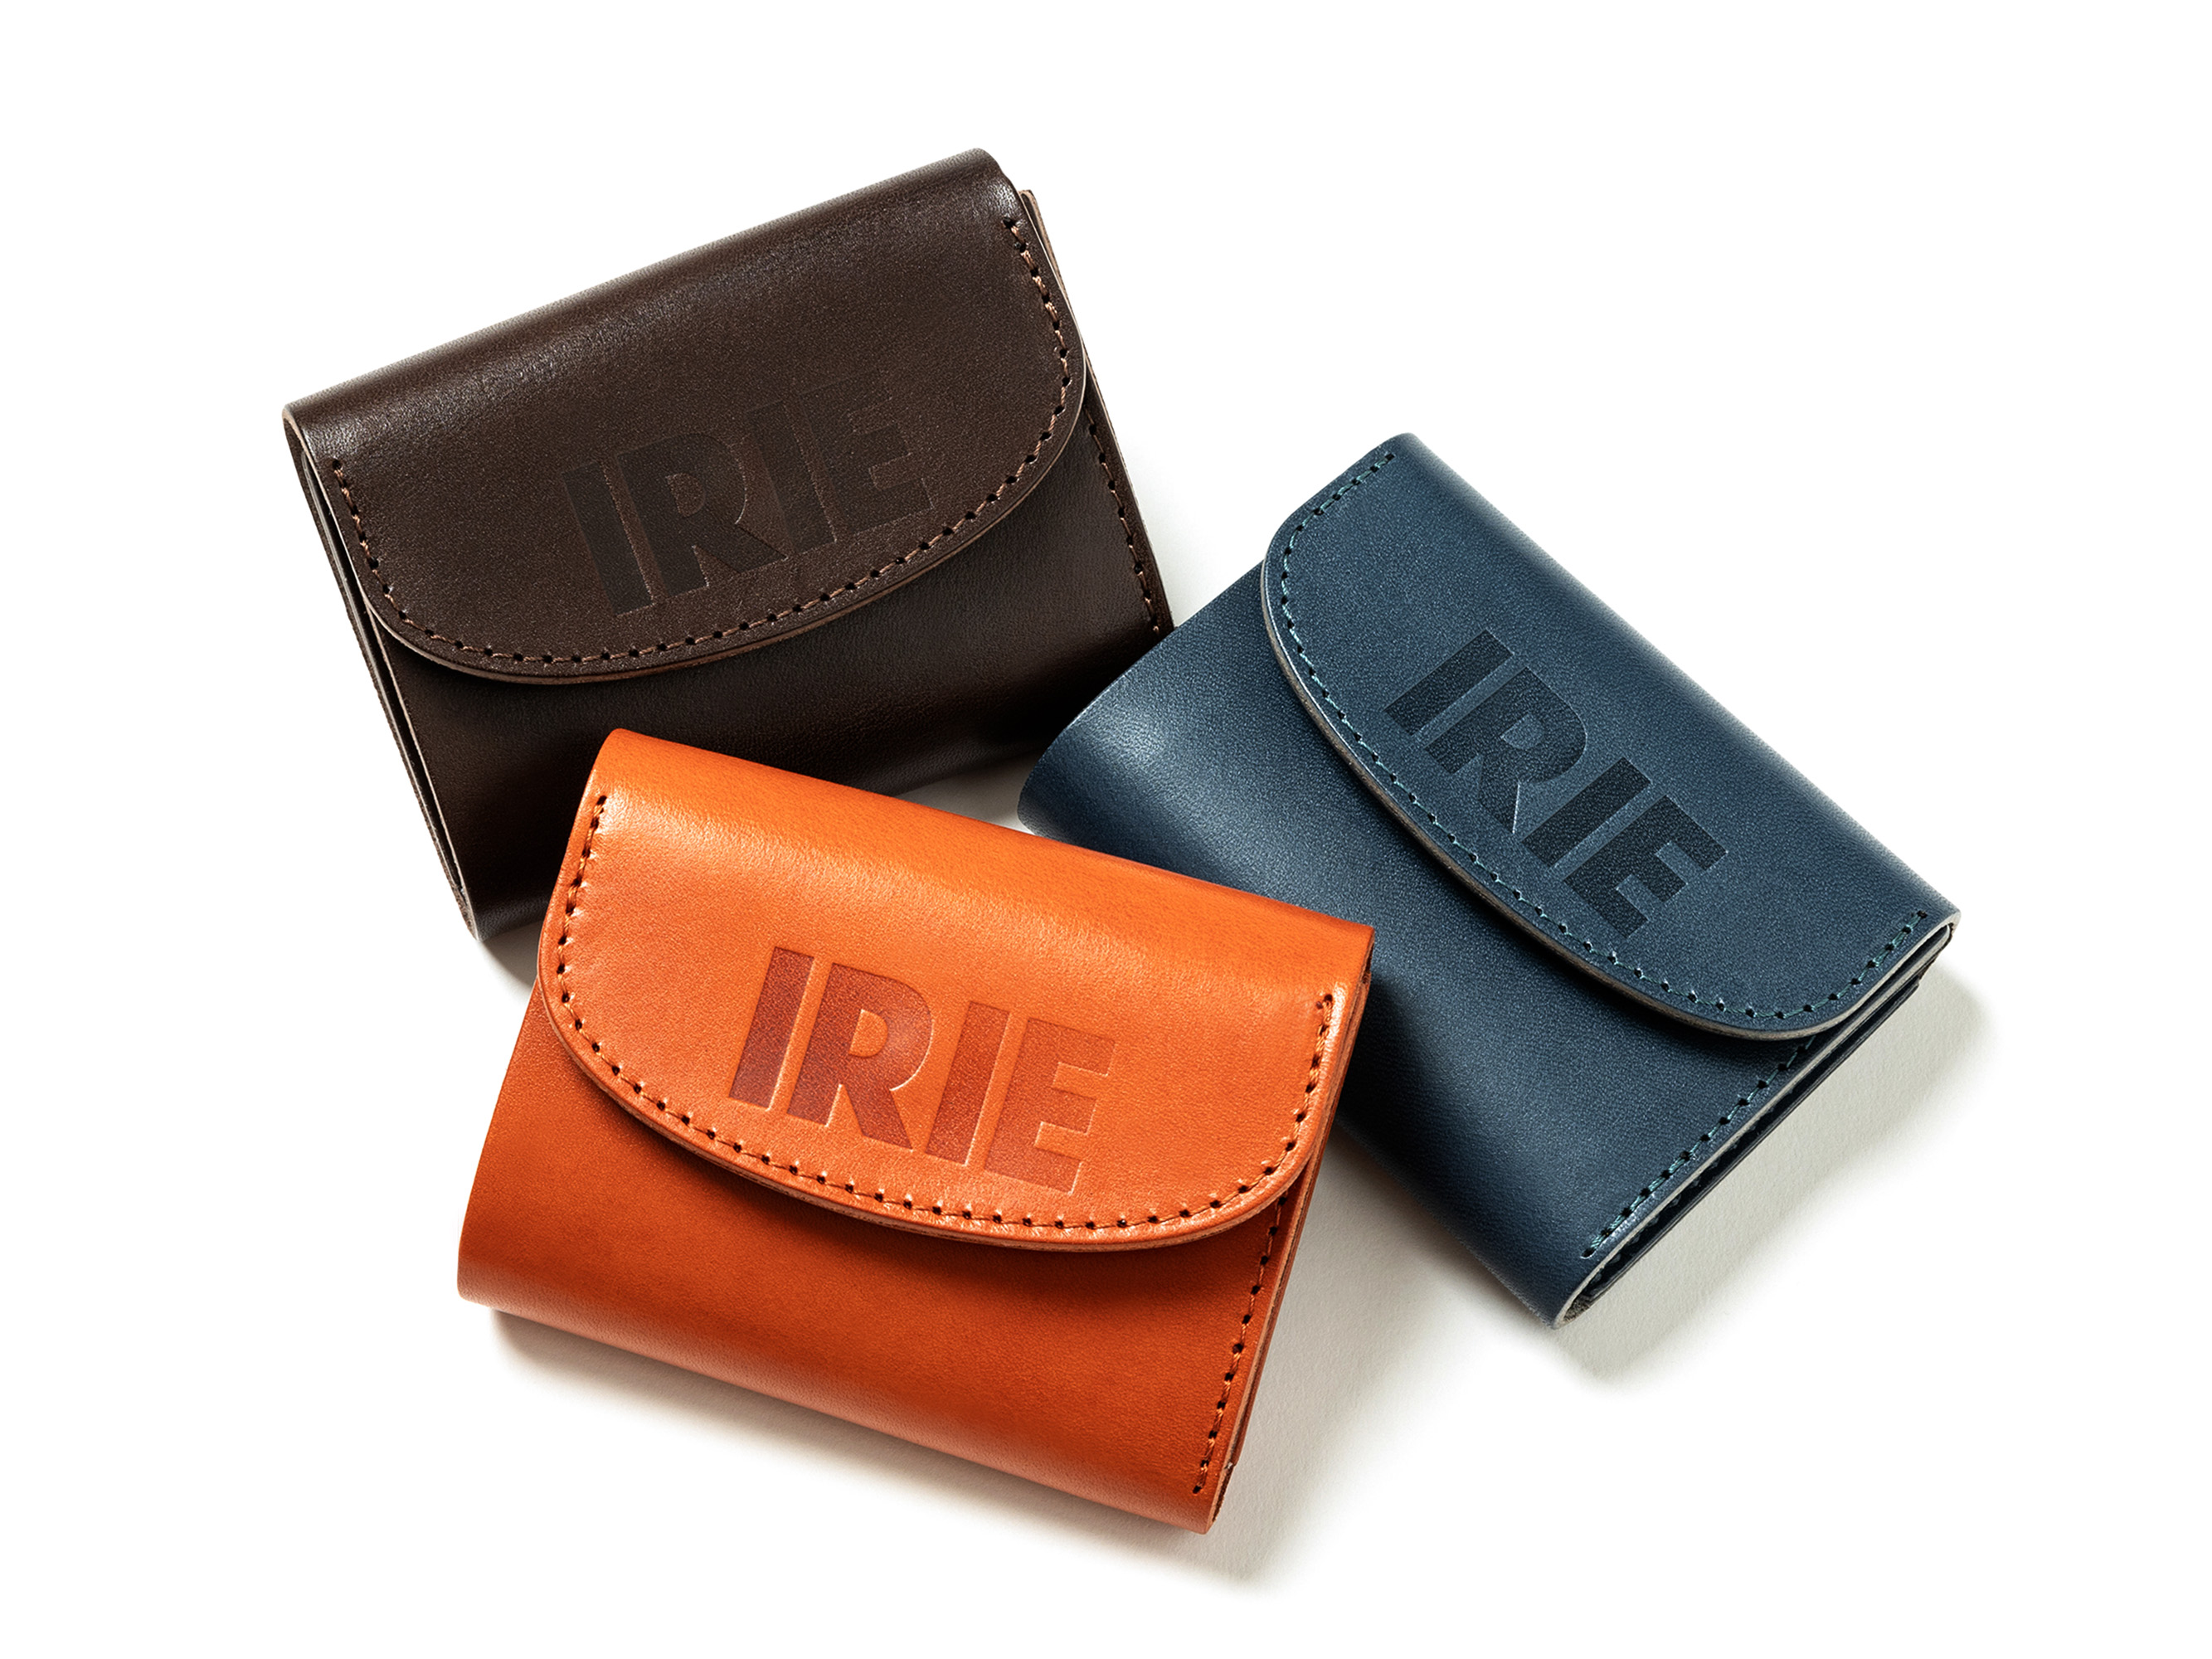 LEATHER FOLDING WALLET - IRIE by irielife